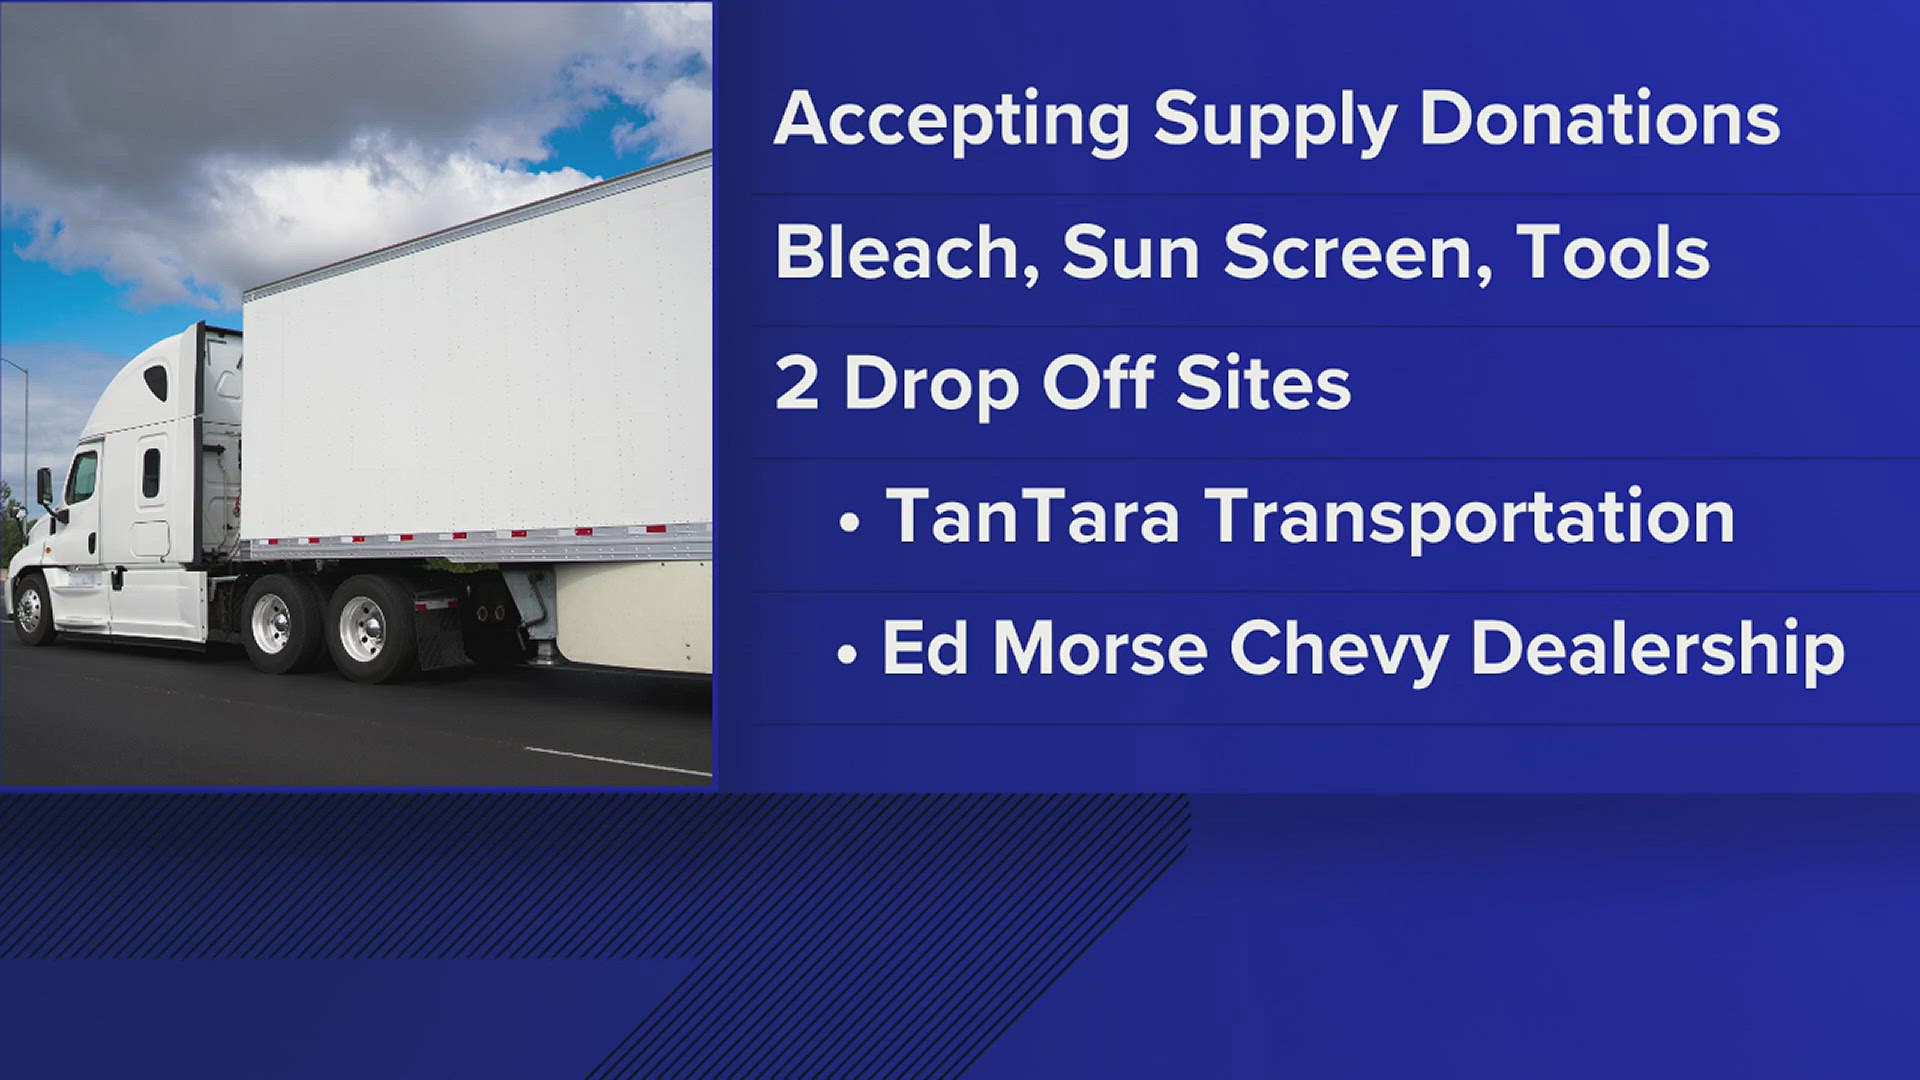 TanTara Transportation Corp. says they plan to fill a semi trailer with donated supplies which will be delivered to the area.